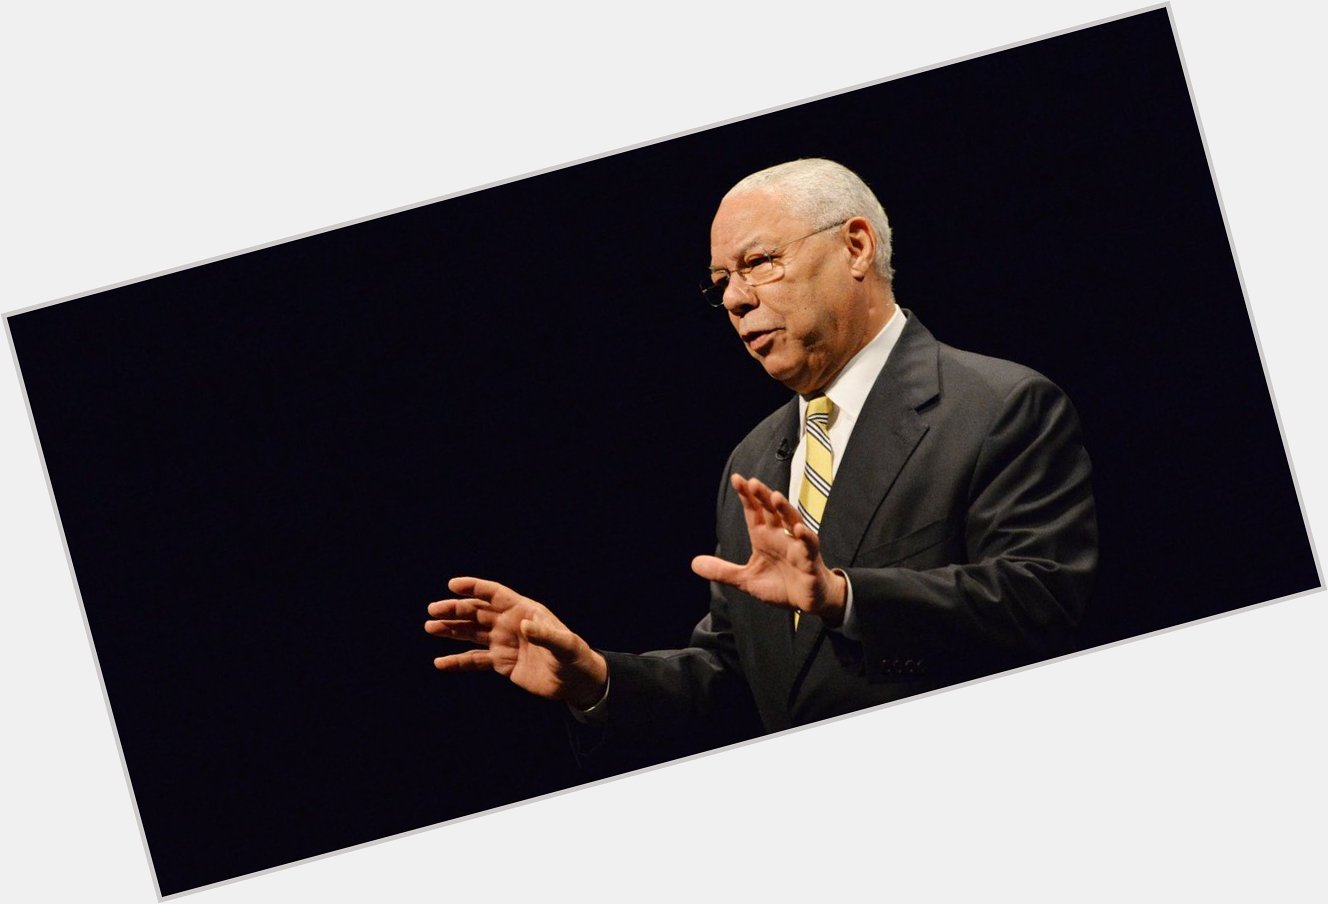 Happy birthday to Colin Powell, born today in 1937. 